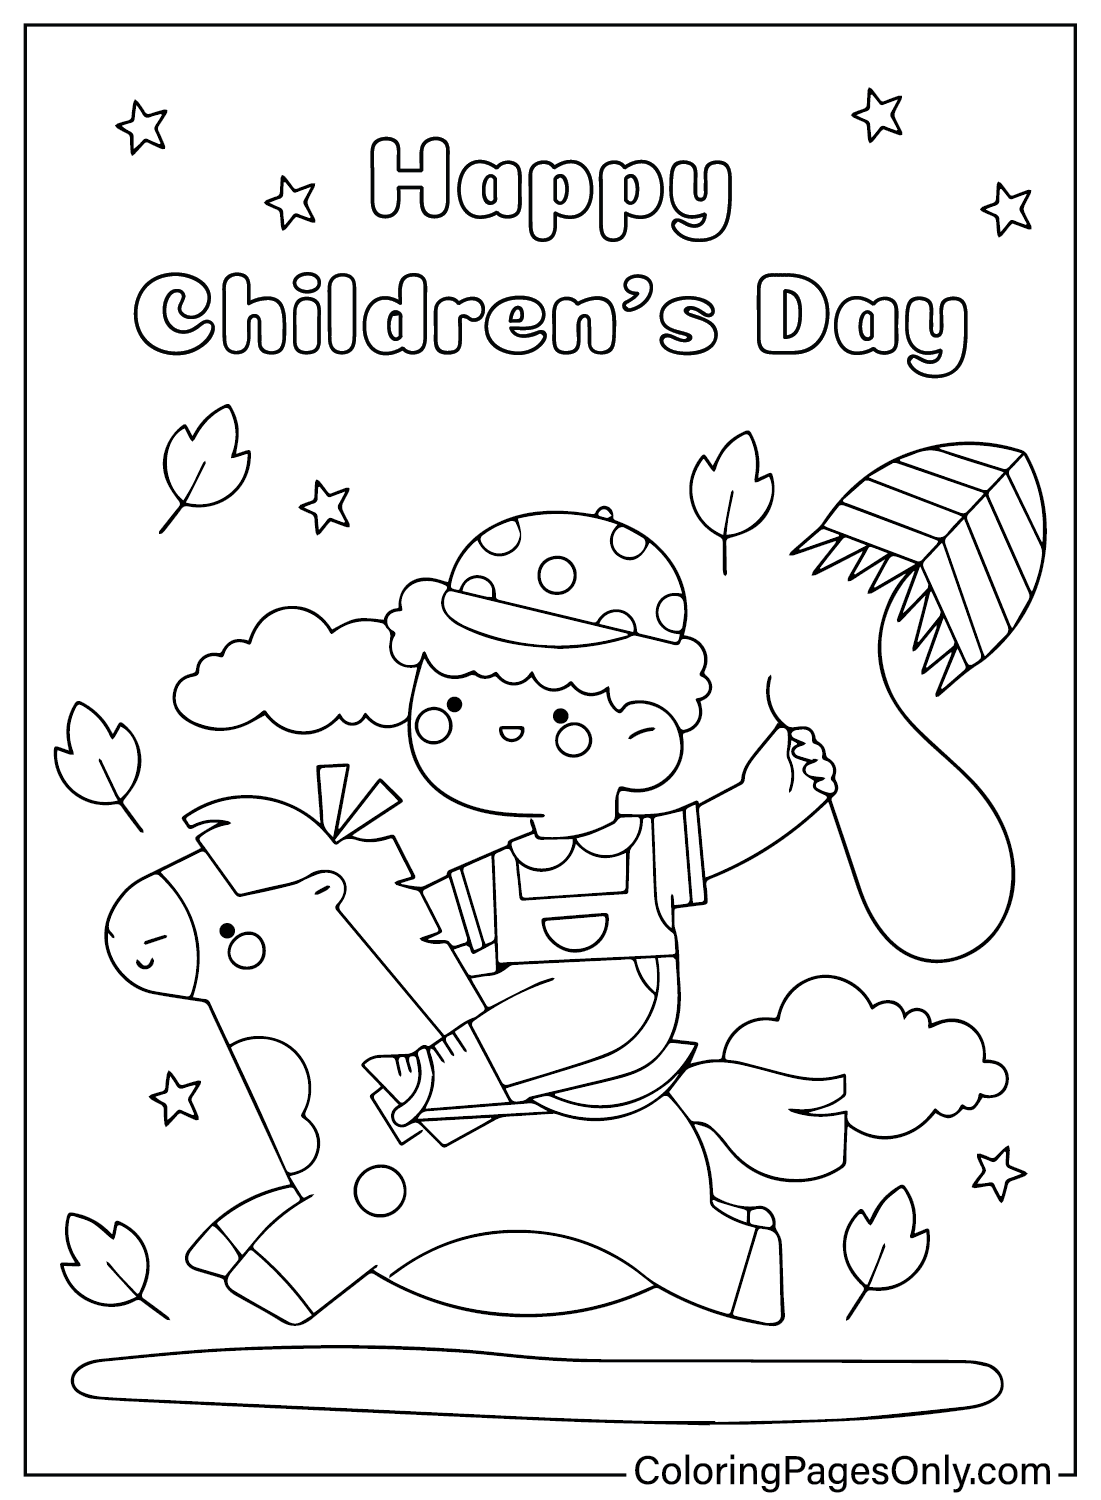 Children’s Day to Color from Children's Day